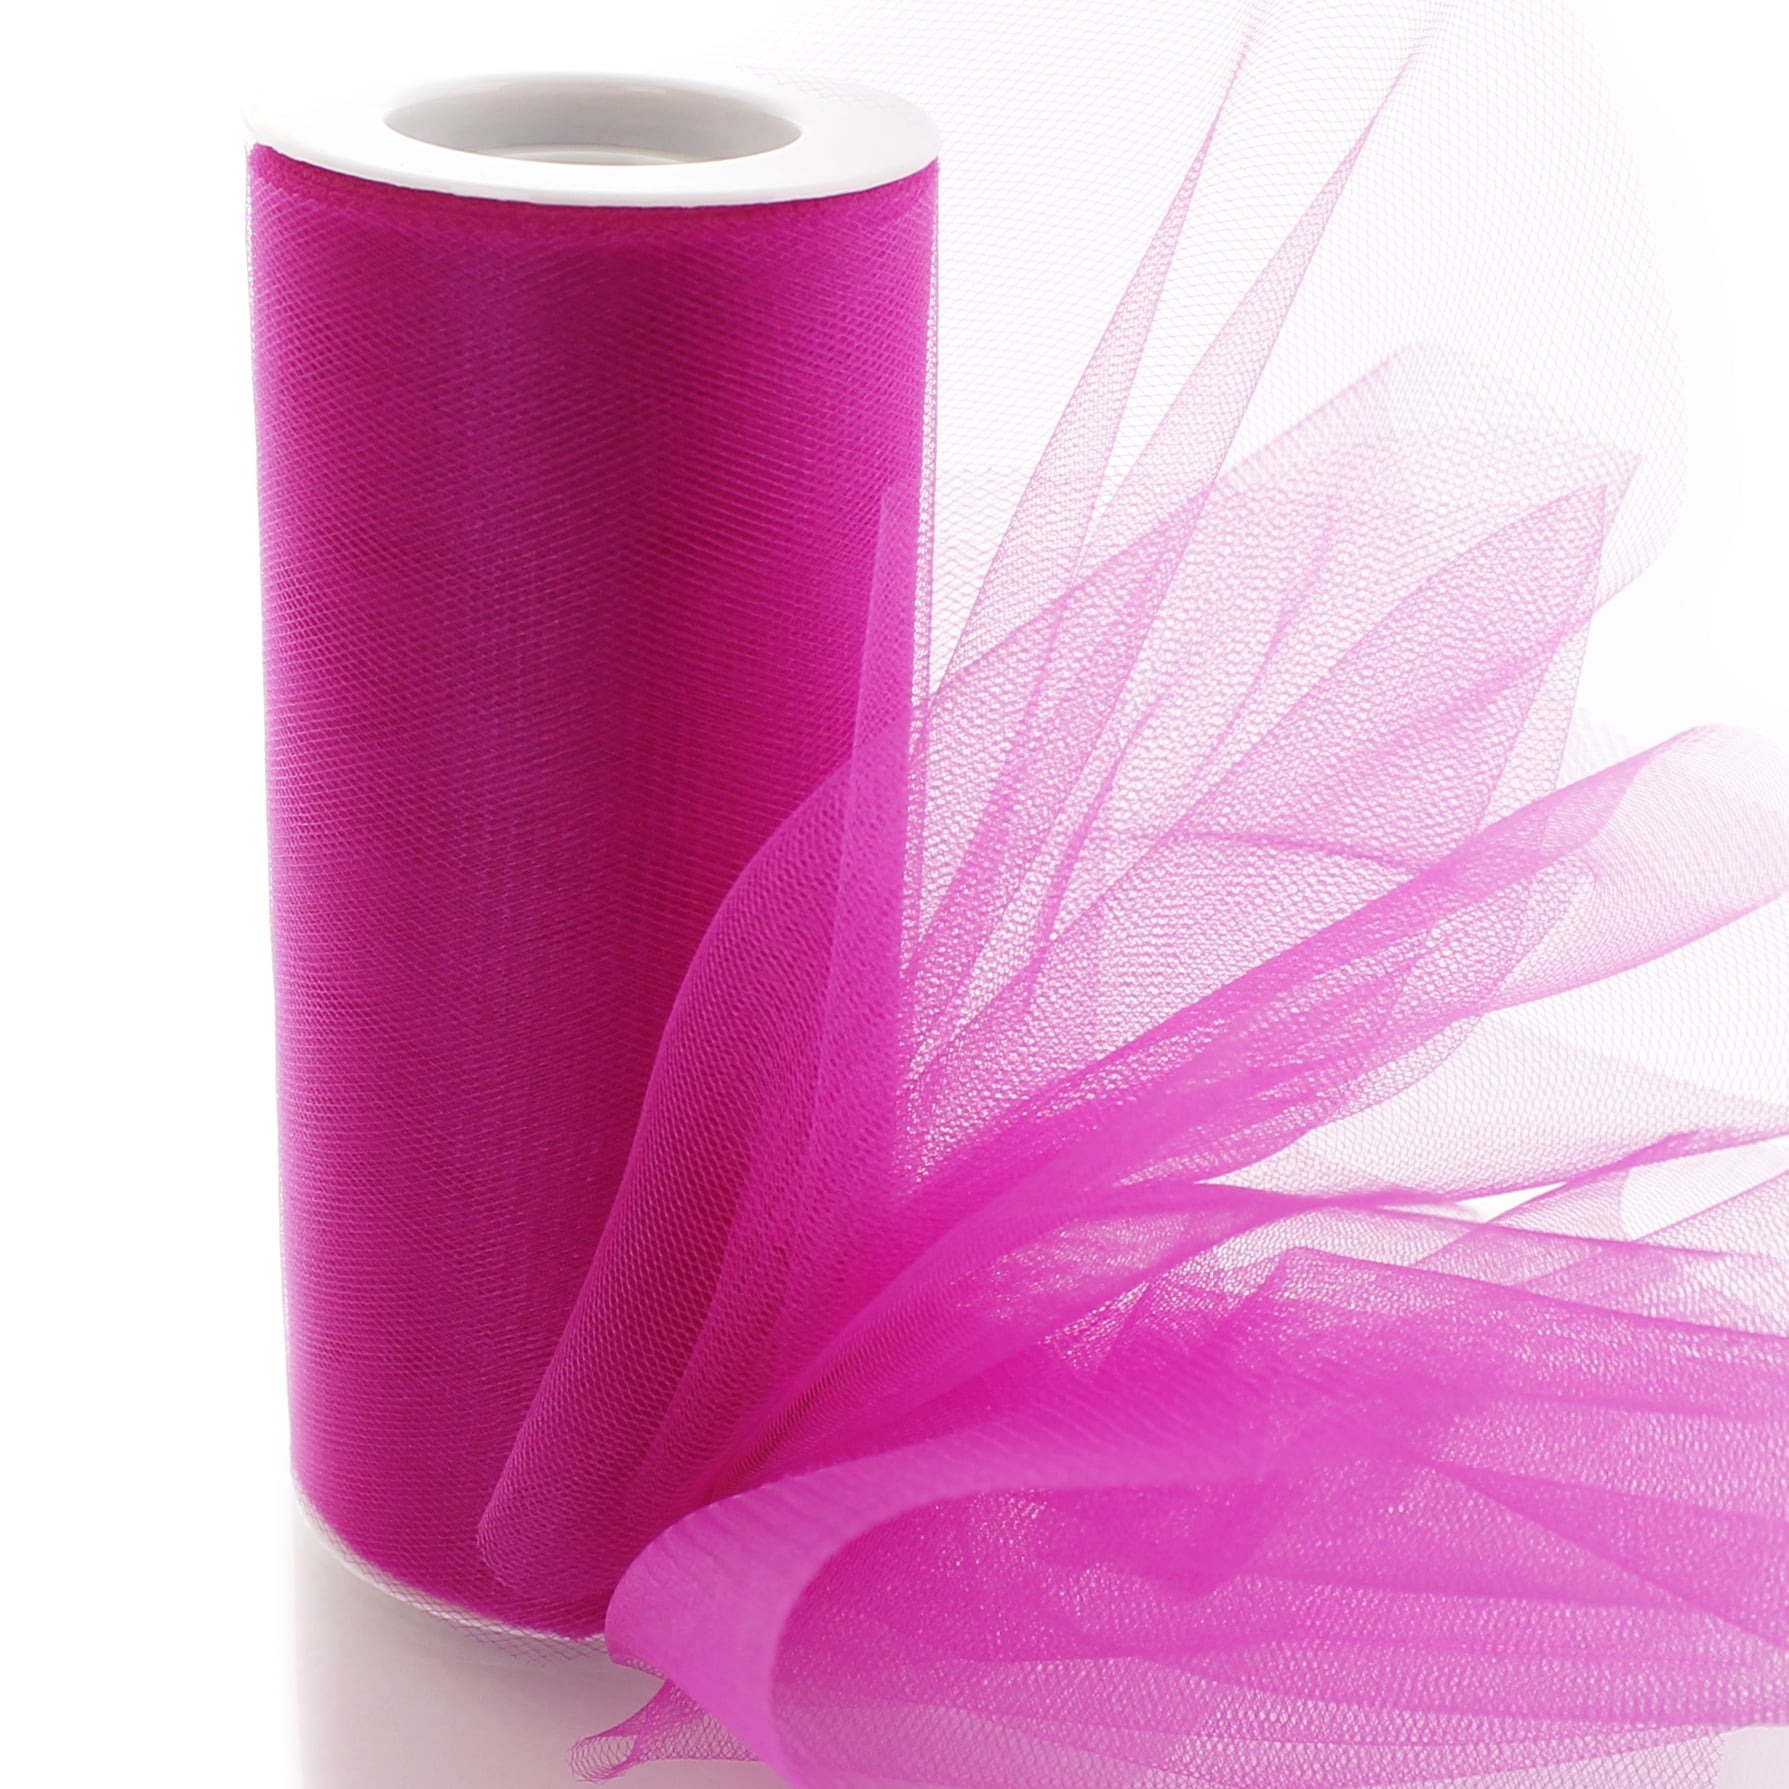 Senkary Glitter Tulle Roll Sparkling Tulle Ribbon Fabric Tulle Spool for Wedding Decoration Gift Wrapping, 6 inch by 25 Yards (Hot Pink)